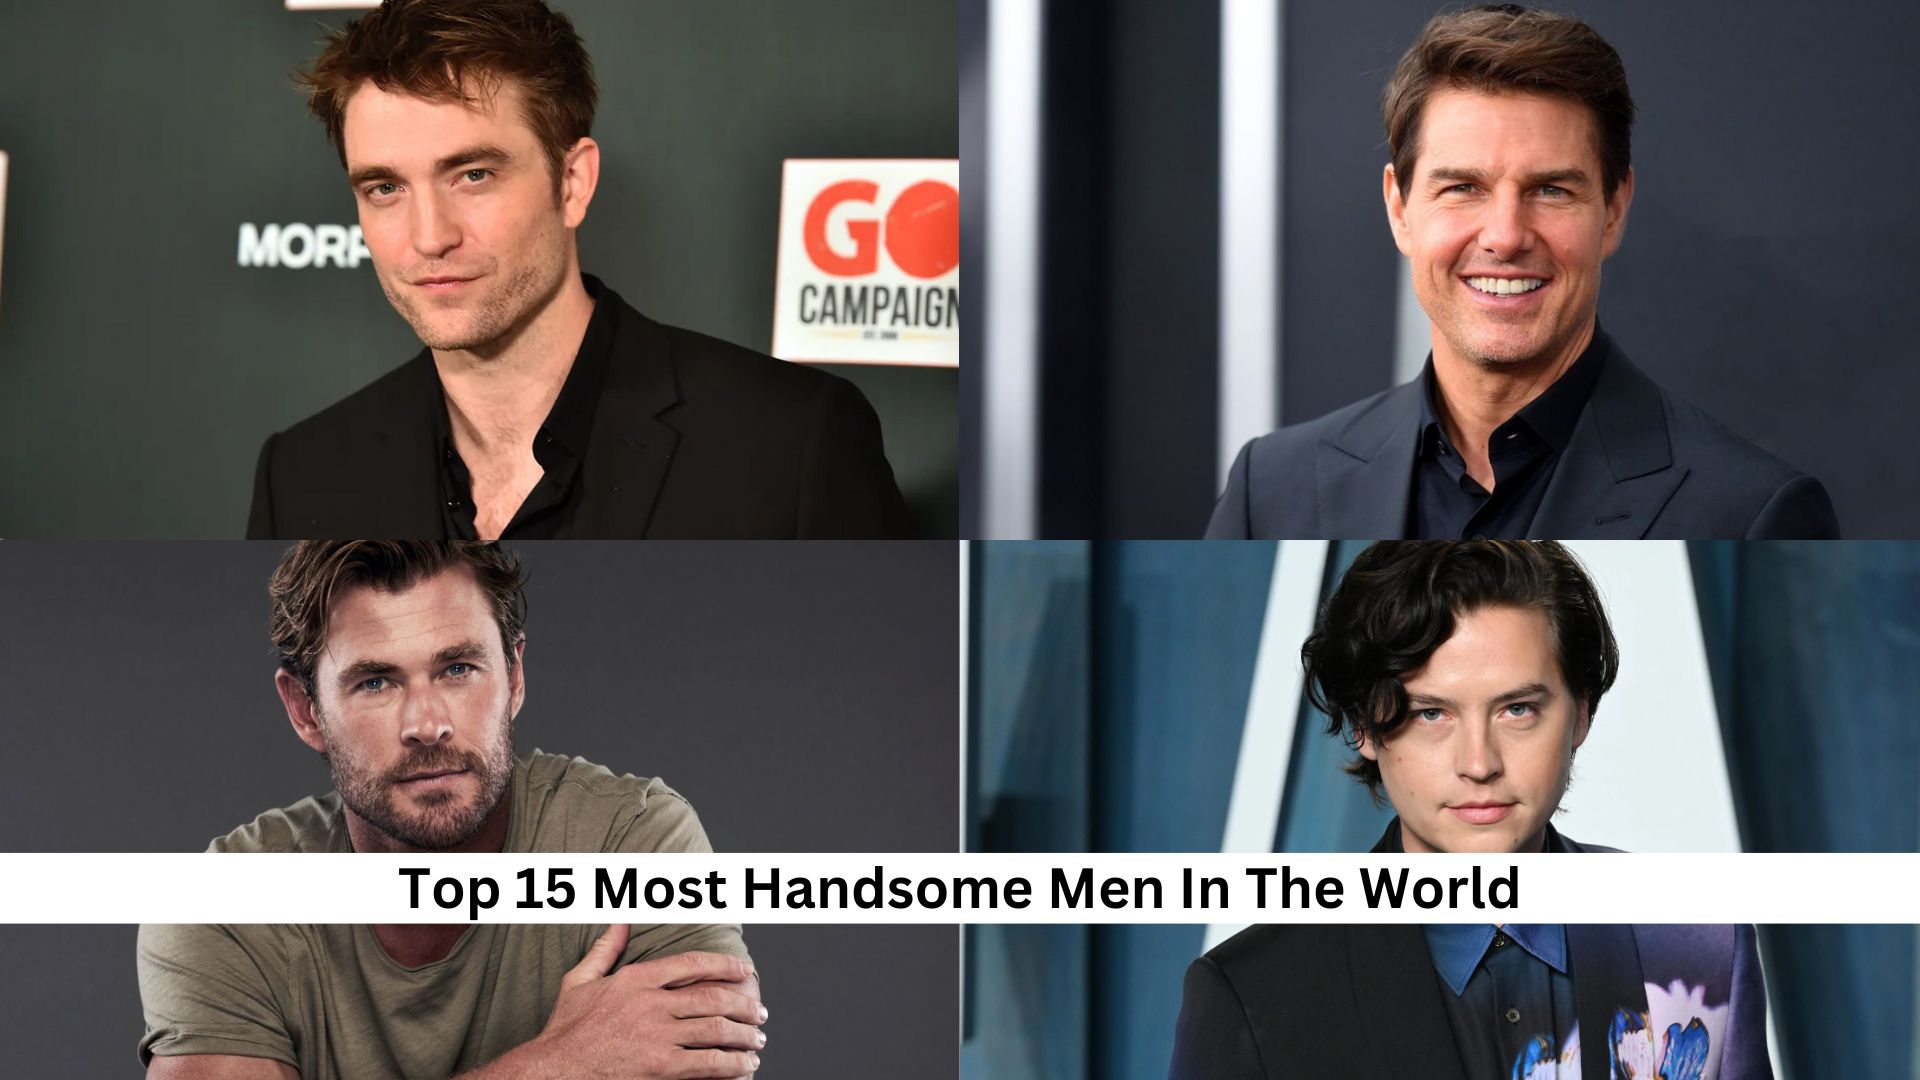 Top 15 Most Handsome Men In The World